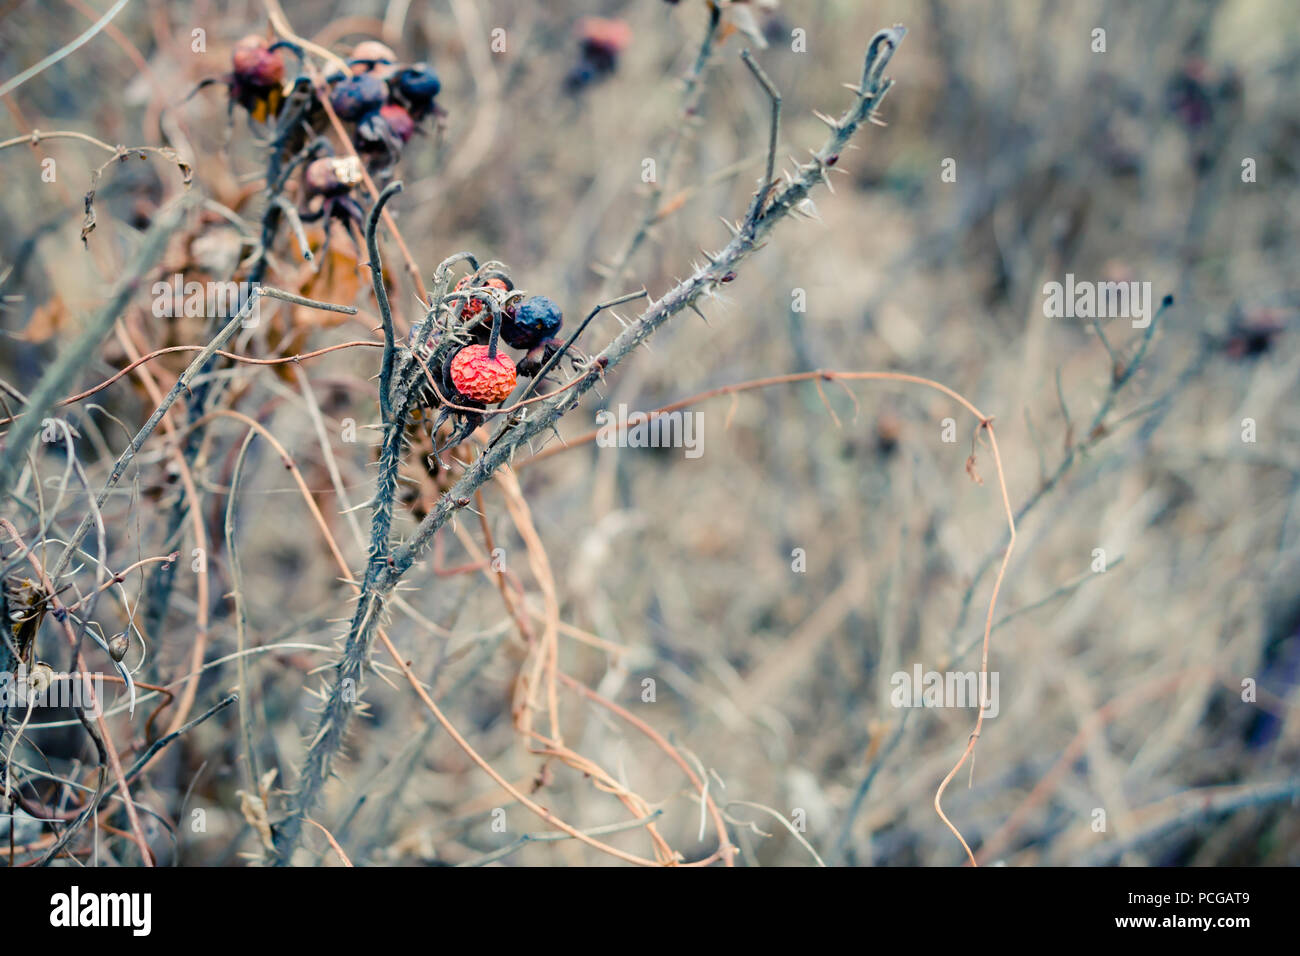 Shrivelled, wrinkled rose hips in winter on a very thorny dry branch of a rose bush. Stock Photo